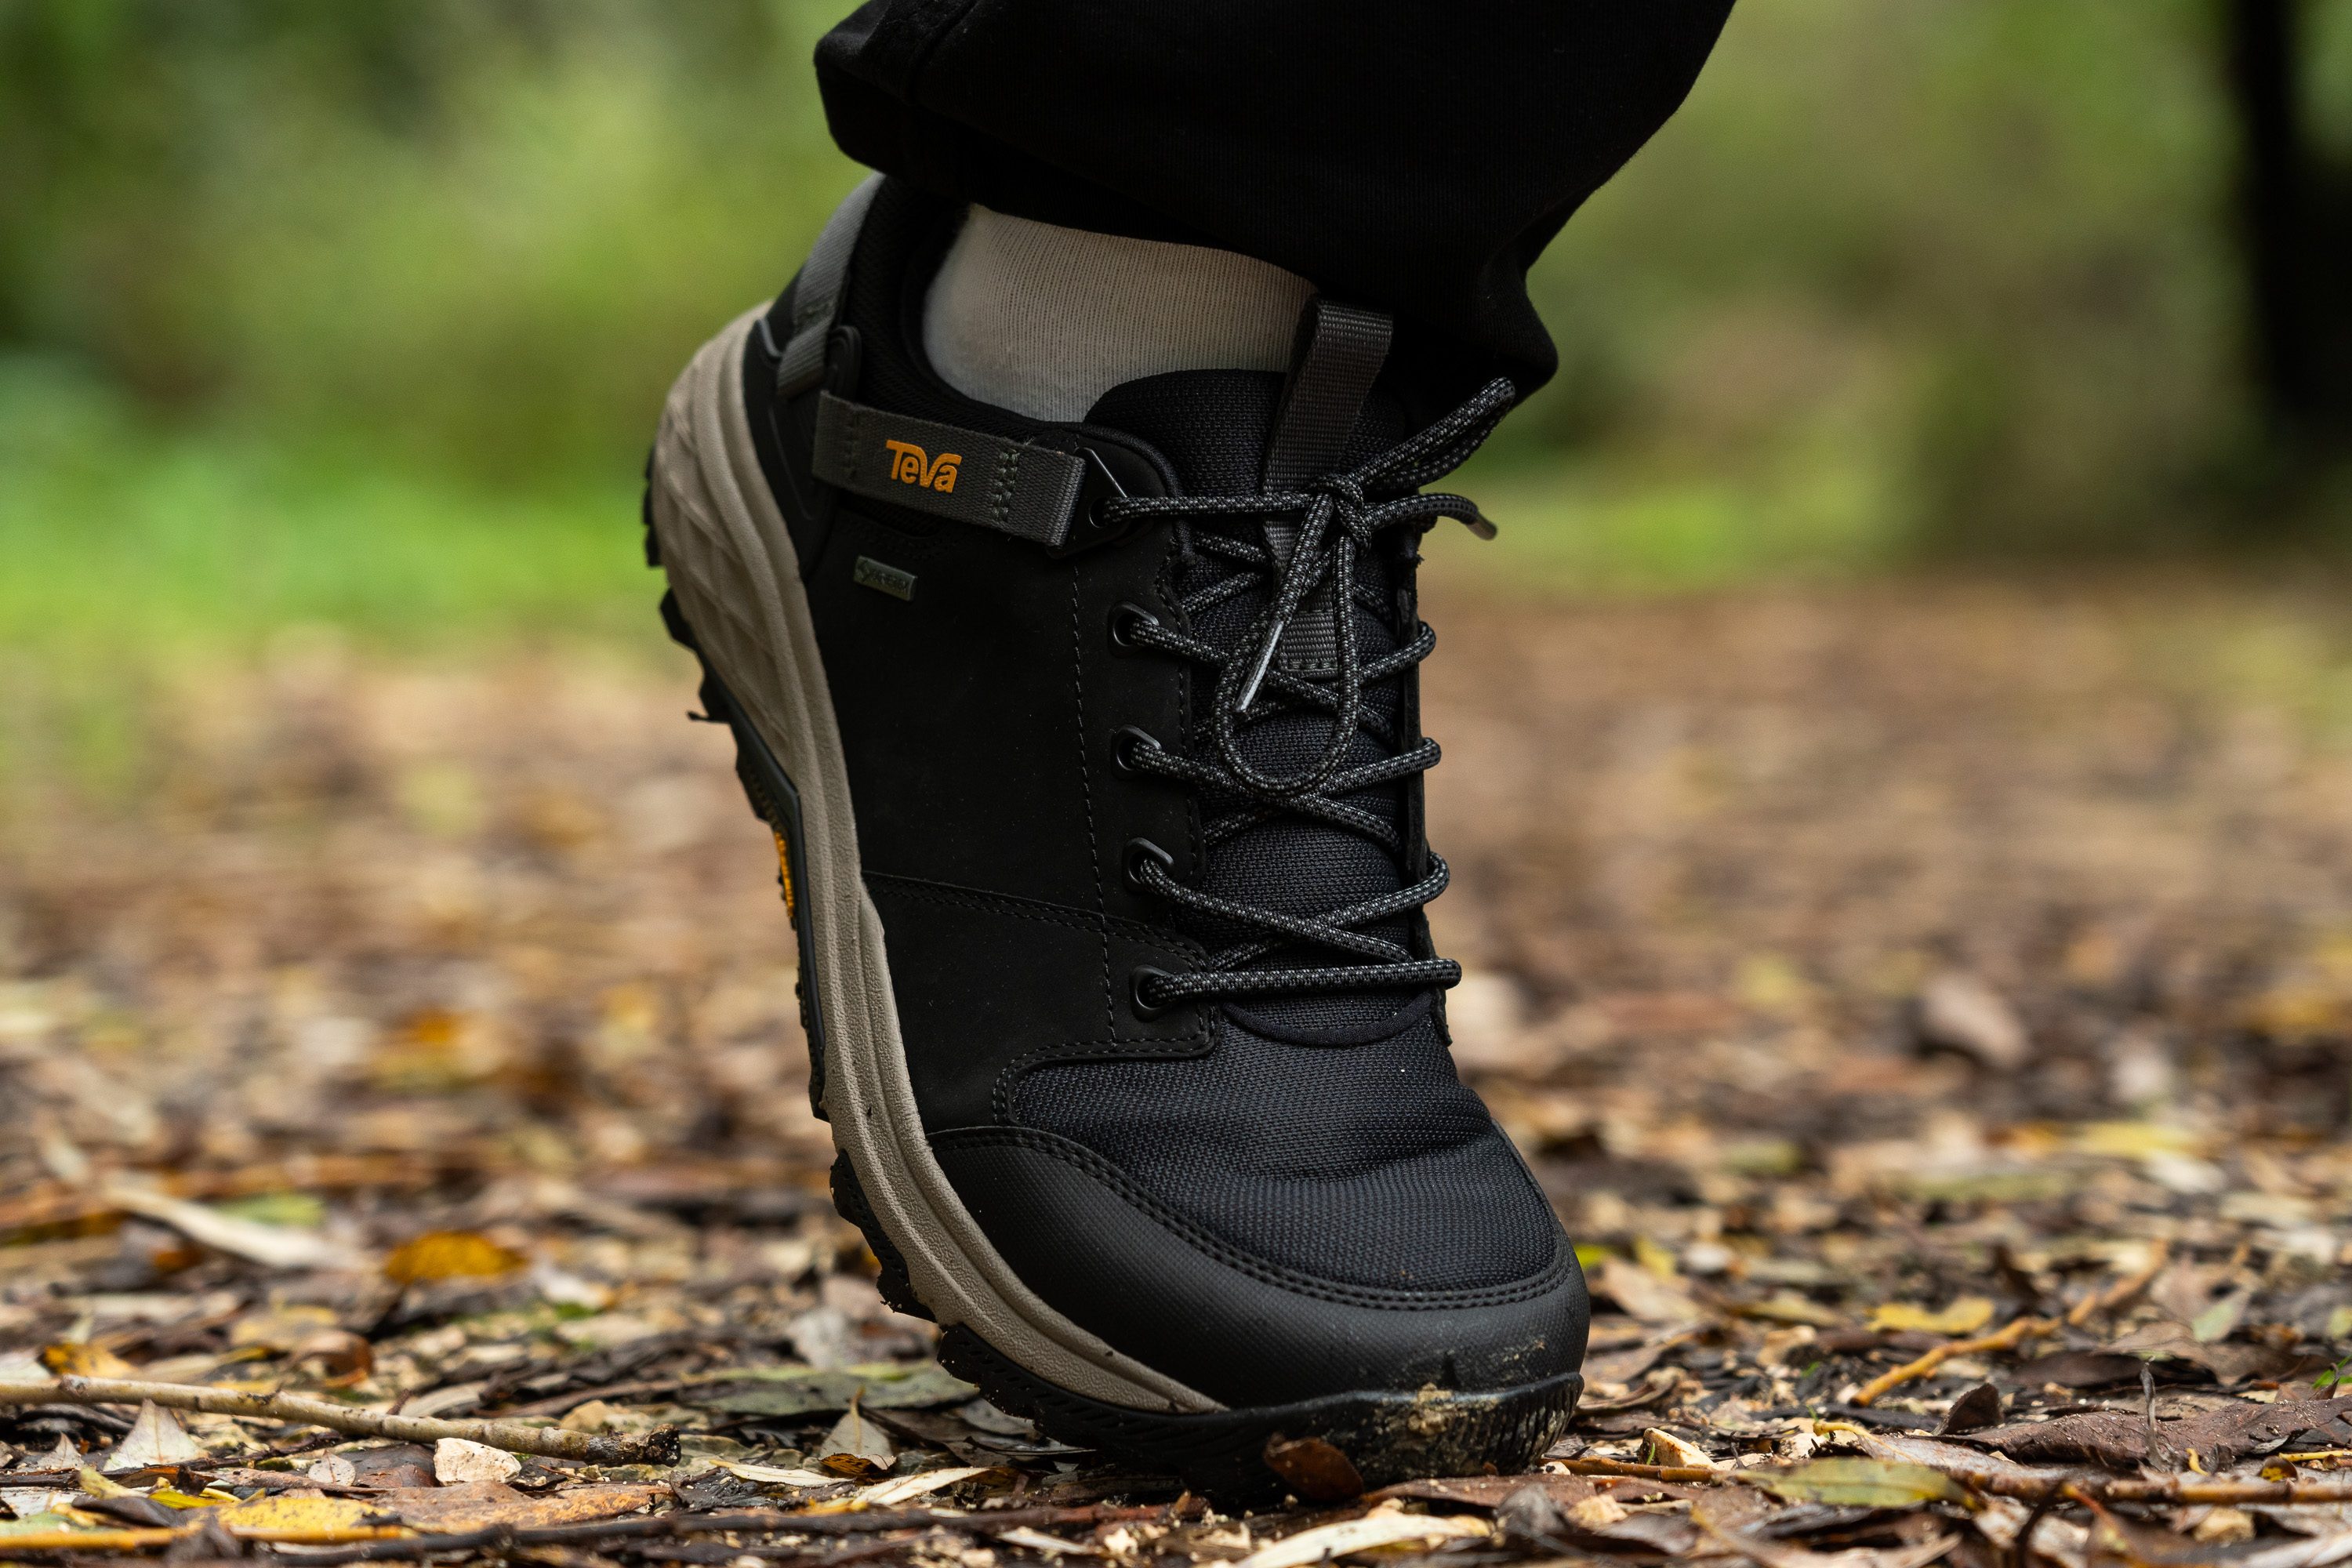 Teva Grandview GTX Low will provide a better experience